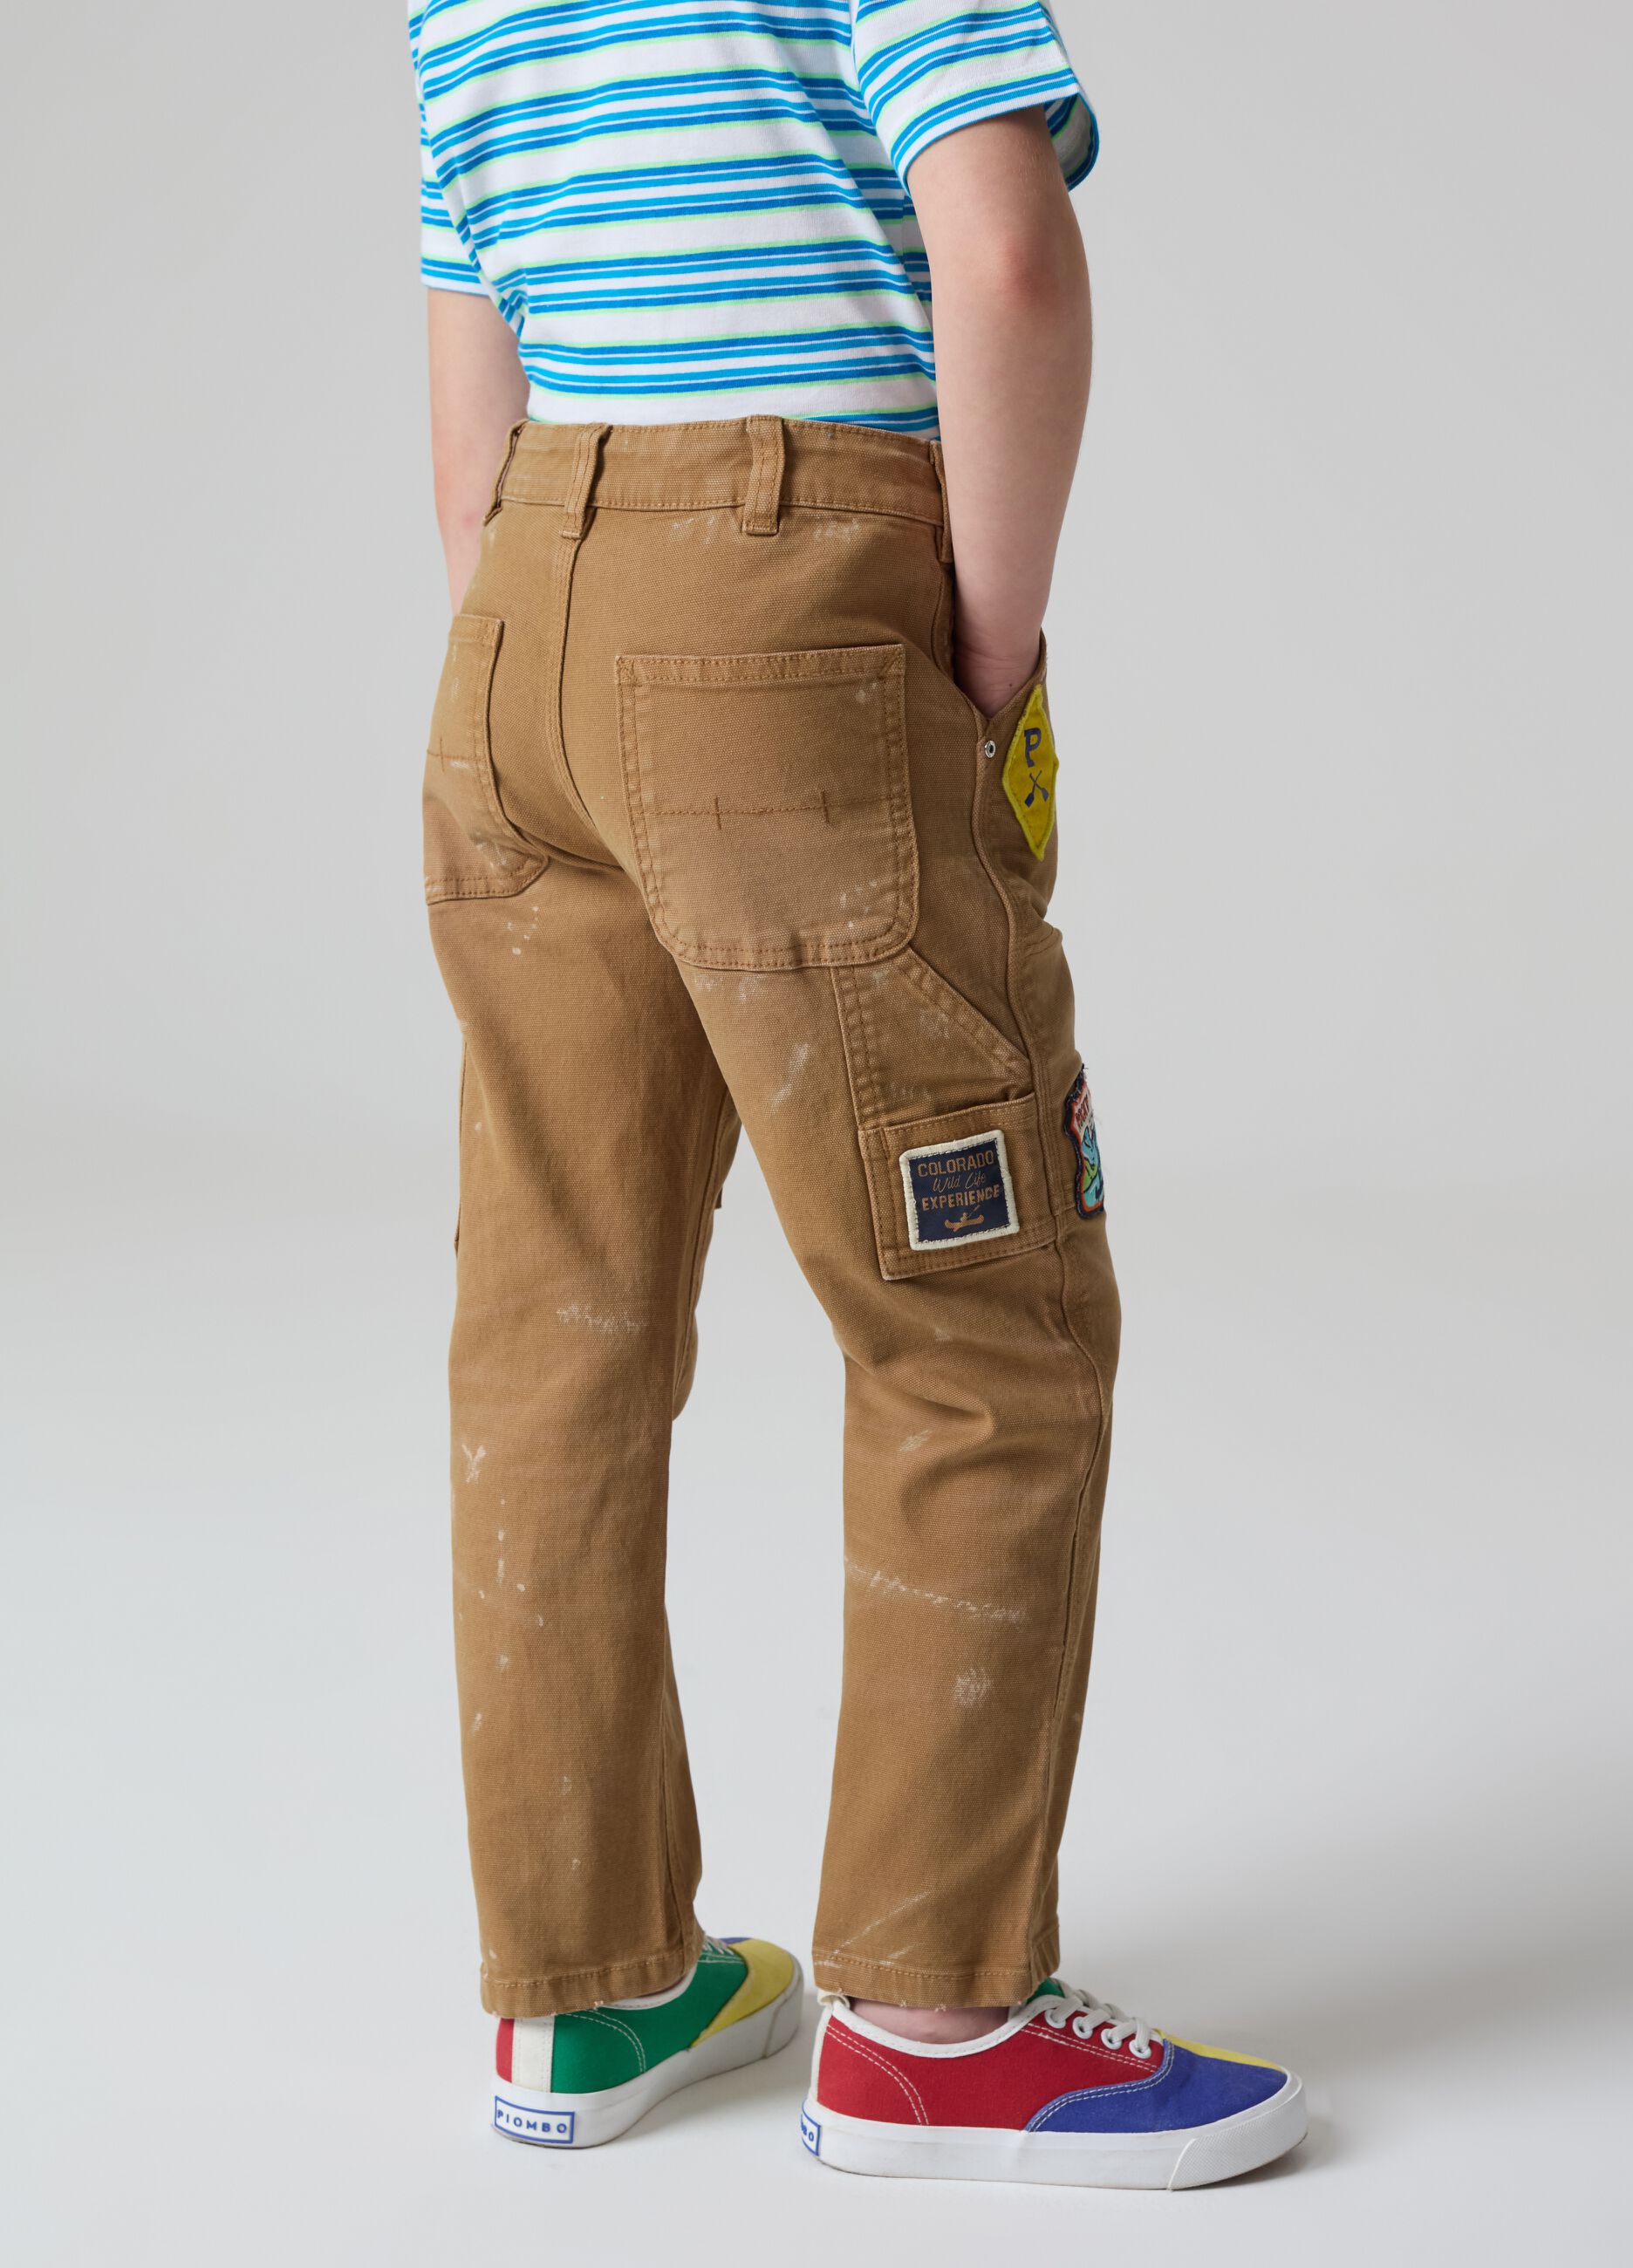 Carpenter jeans with patches